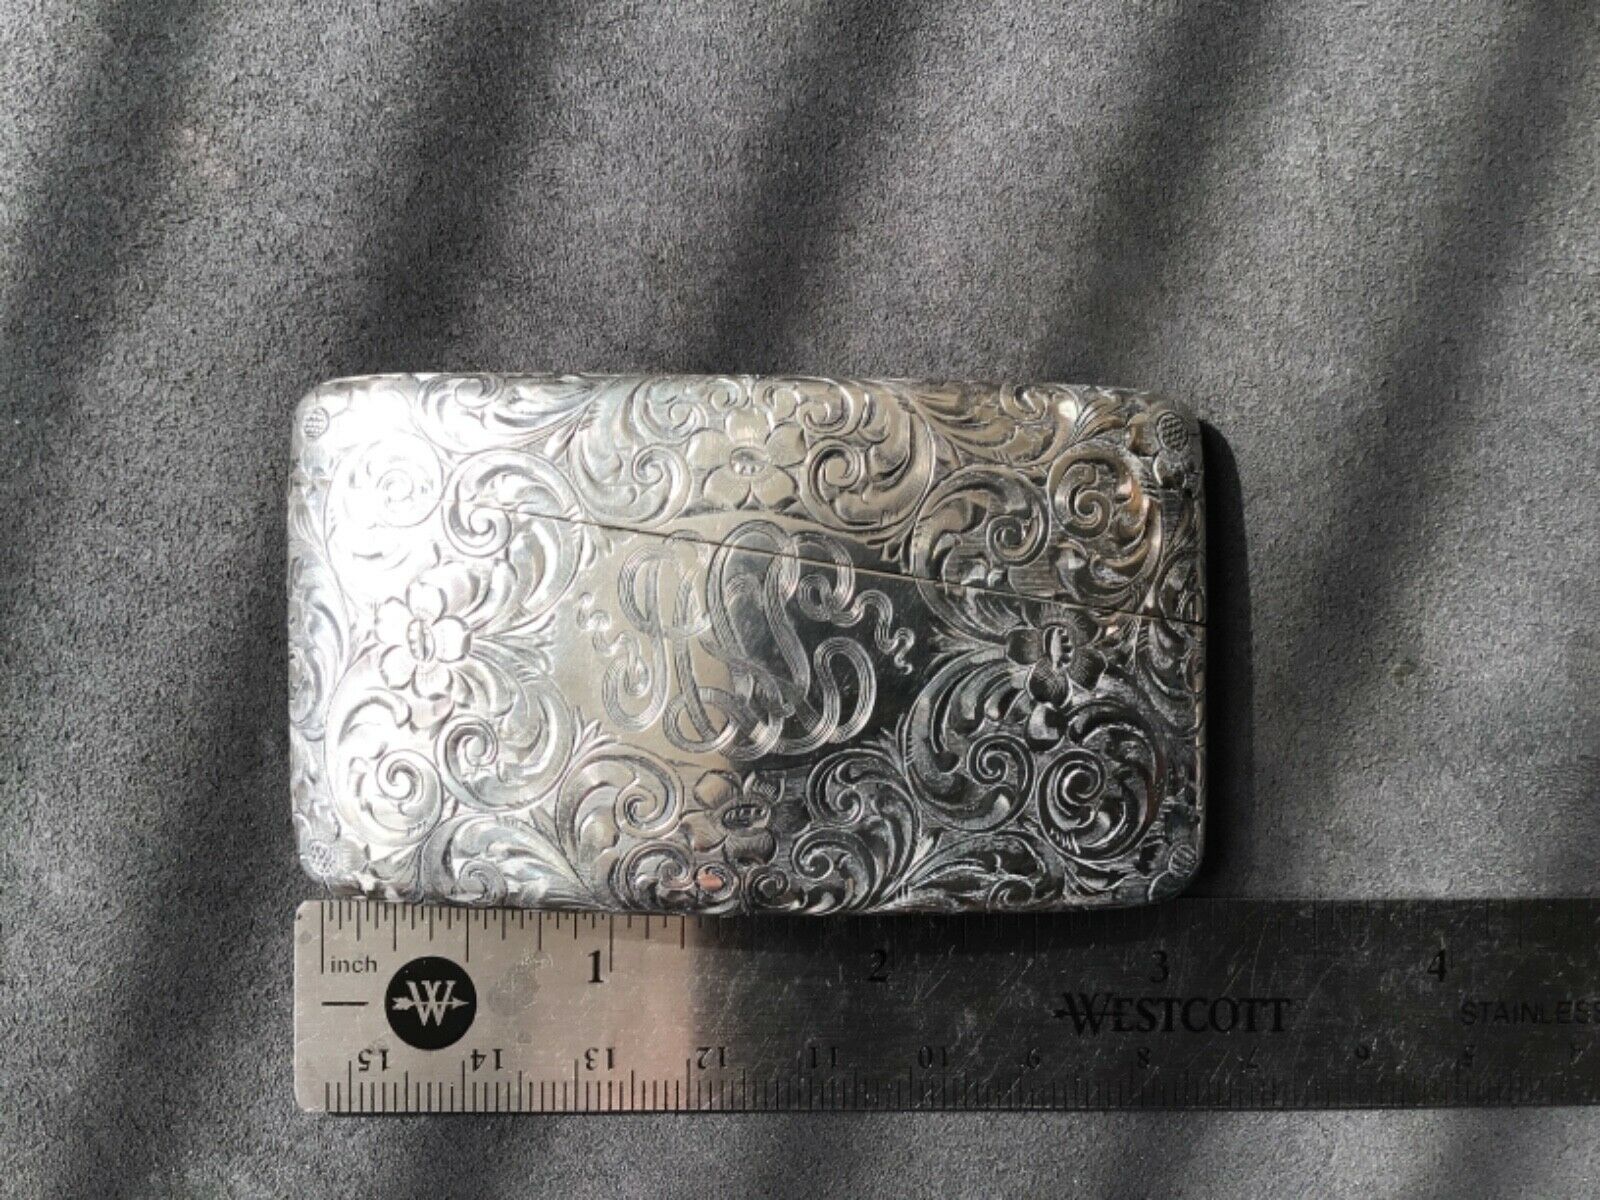 Antique Curved Sterling Silver Card Case, 3” Long By 1.5” Wide. Mint Condition.